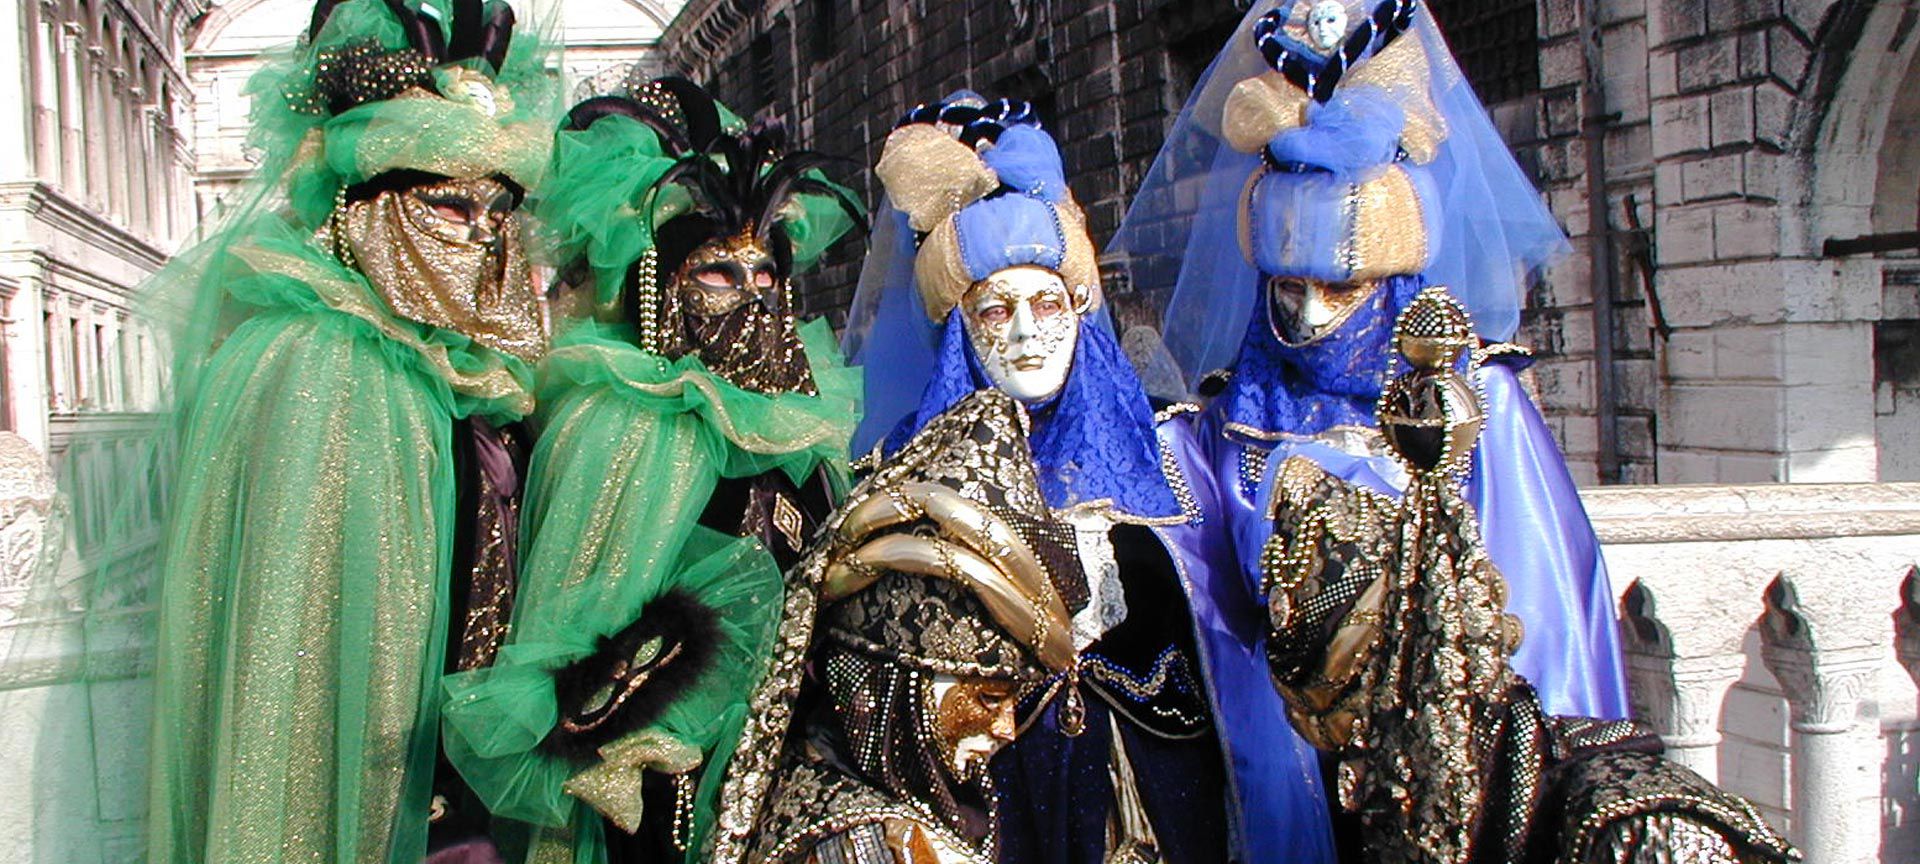 Traditional Carnivale costumes of Venice